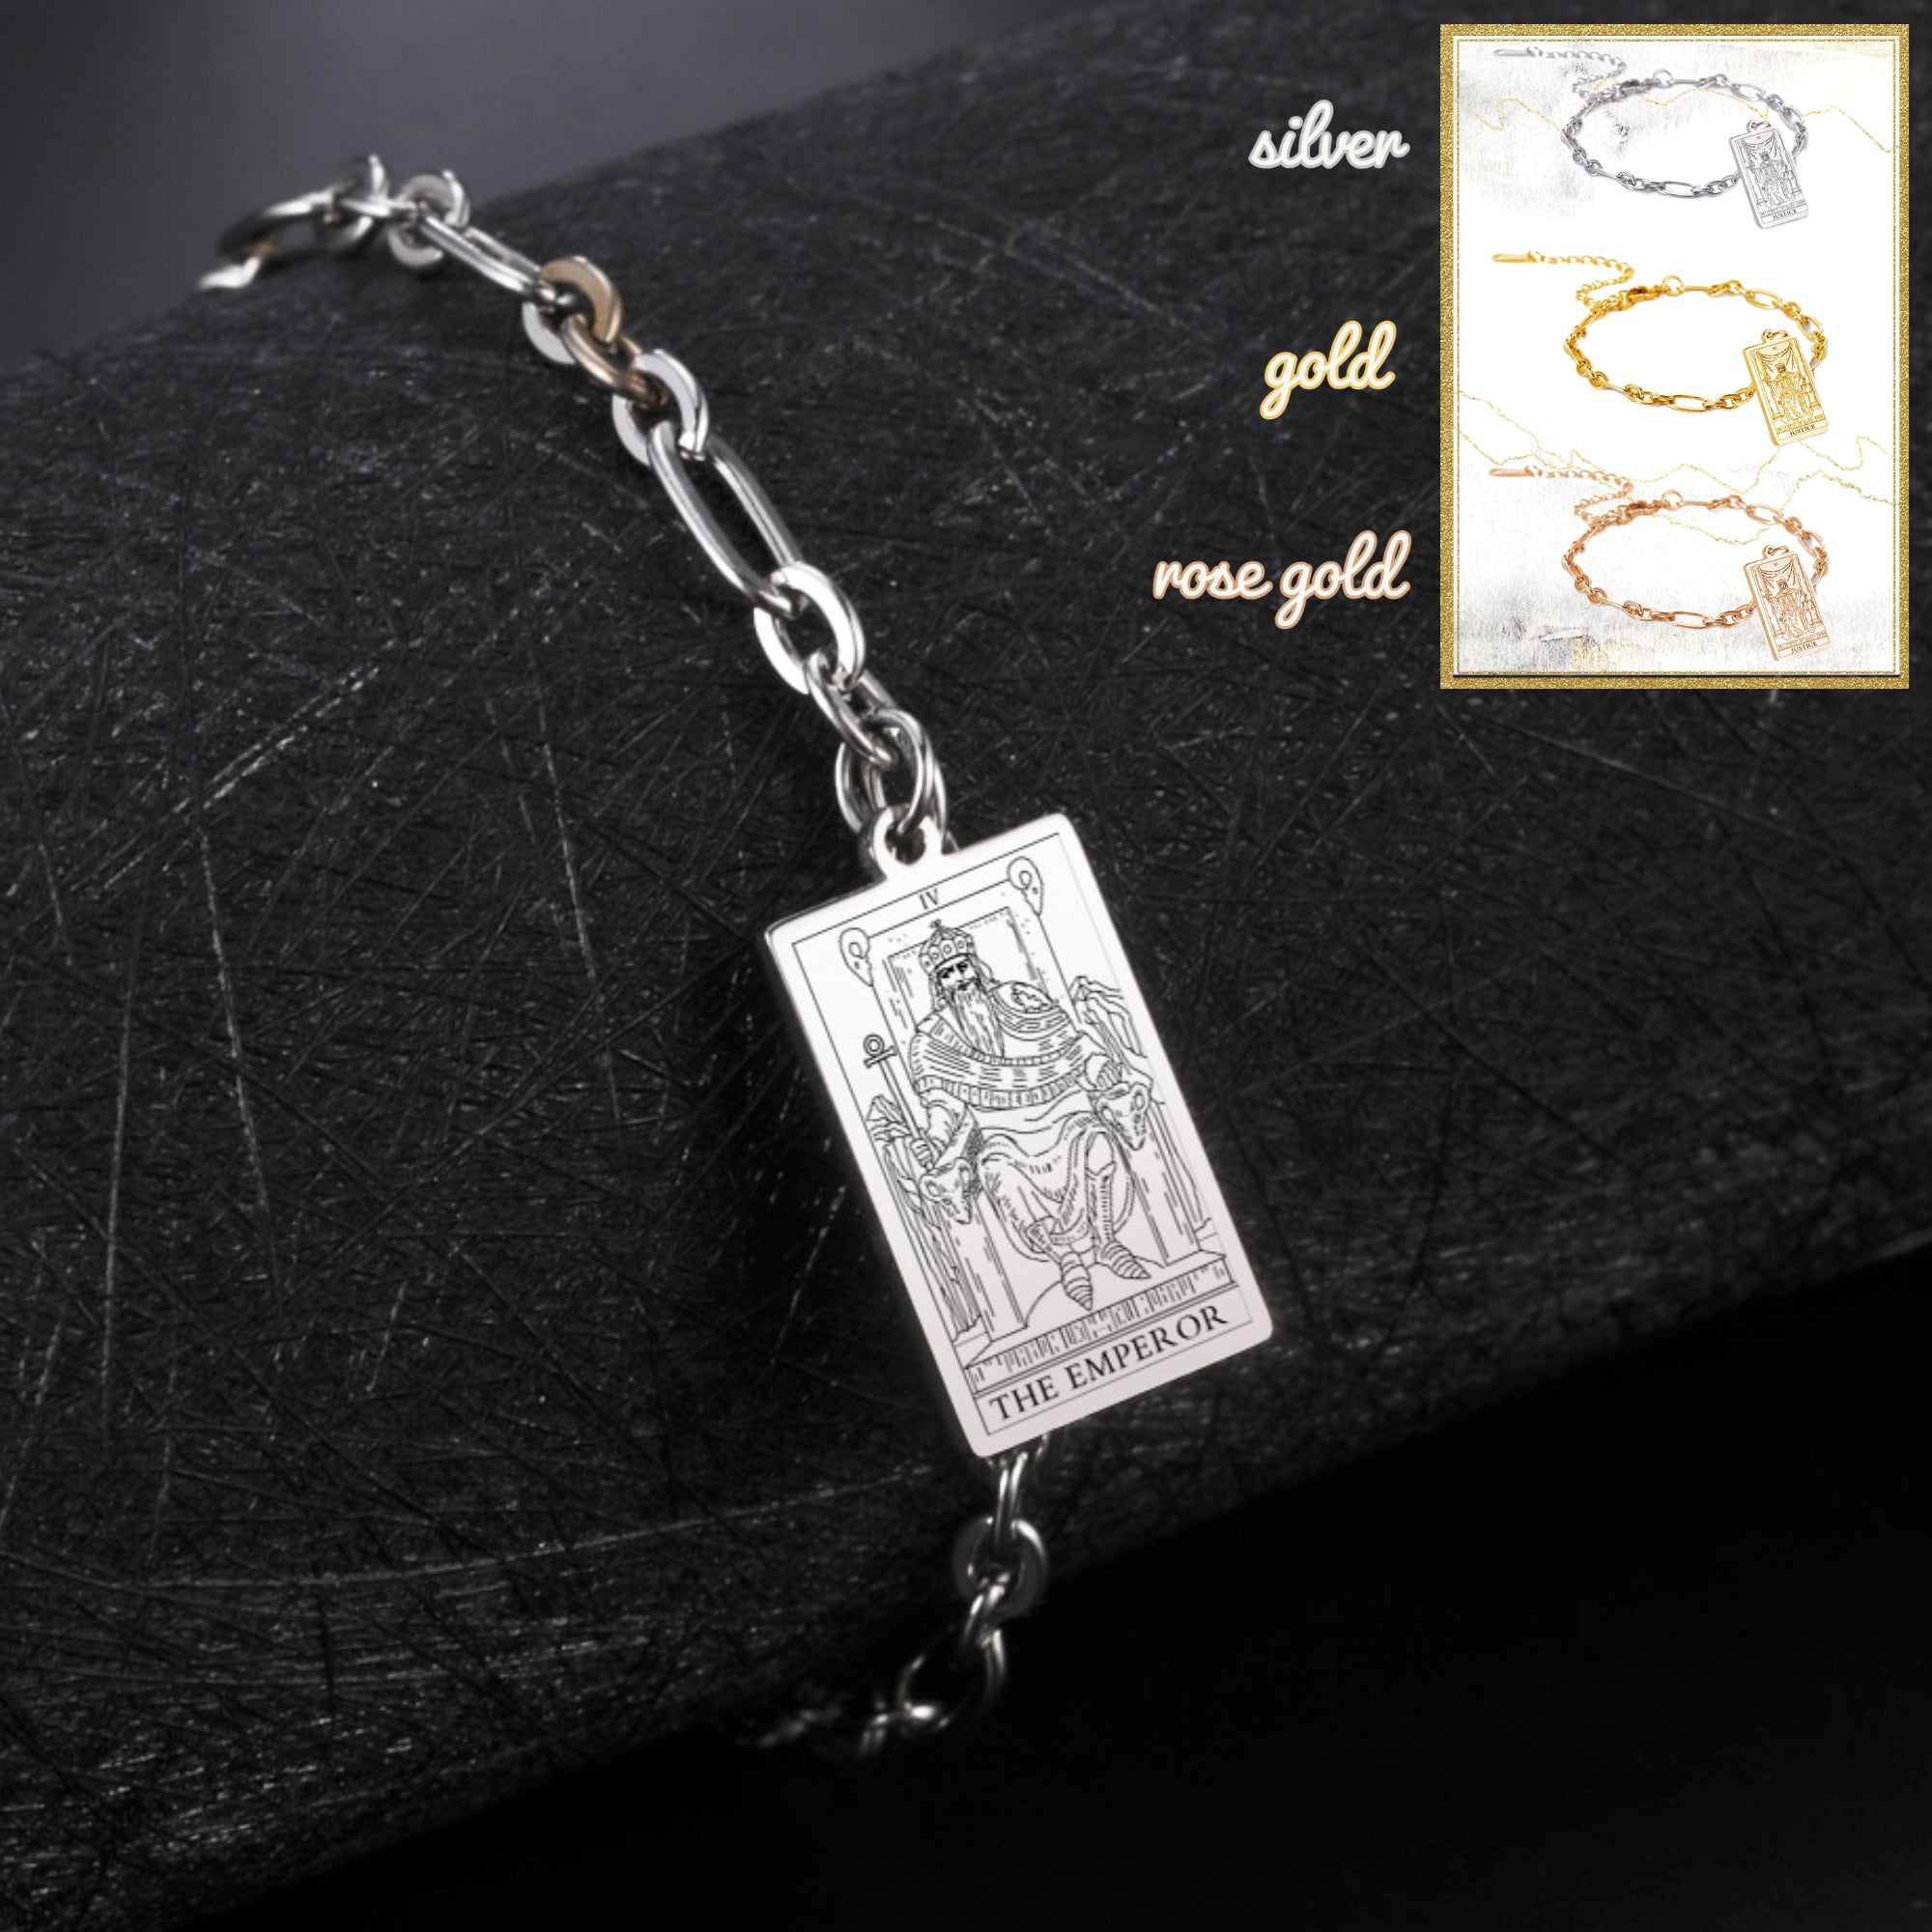 Bracelets With Tarot Card Charms, Stainless Steel Wrist Pendants Of All The 22 Rider-Waite-Smith Major Arcana Divination Cards, Esoteric Jewelry Gift For Spiritual Women | Apollo Tarot